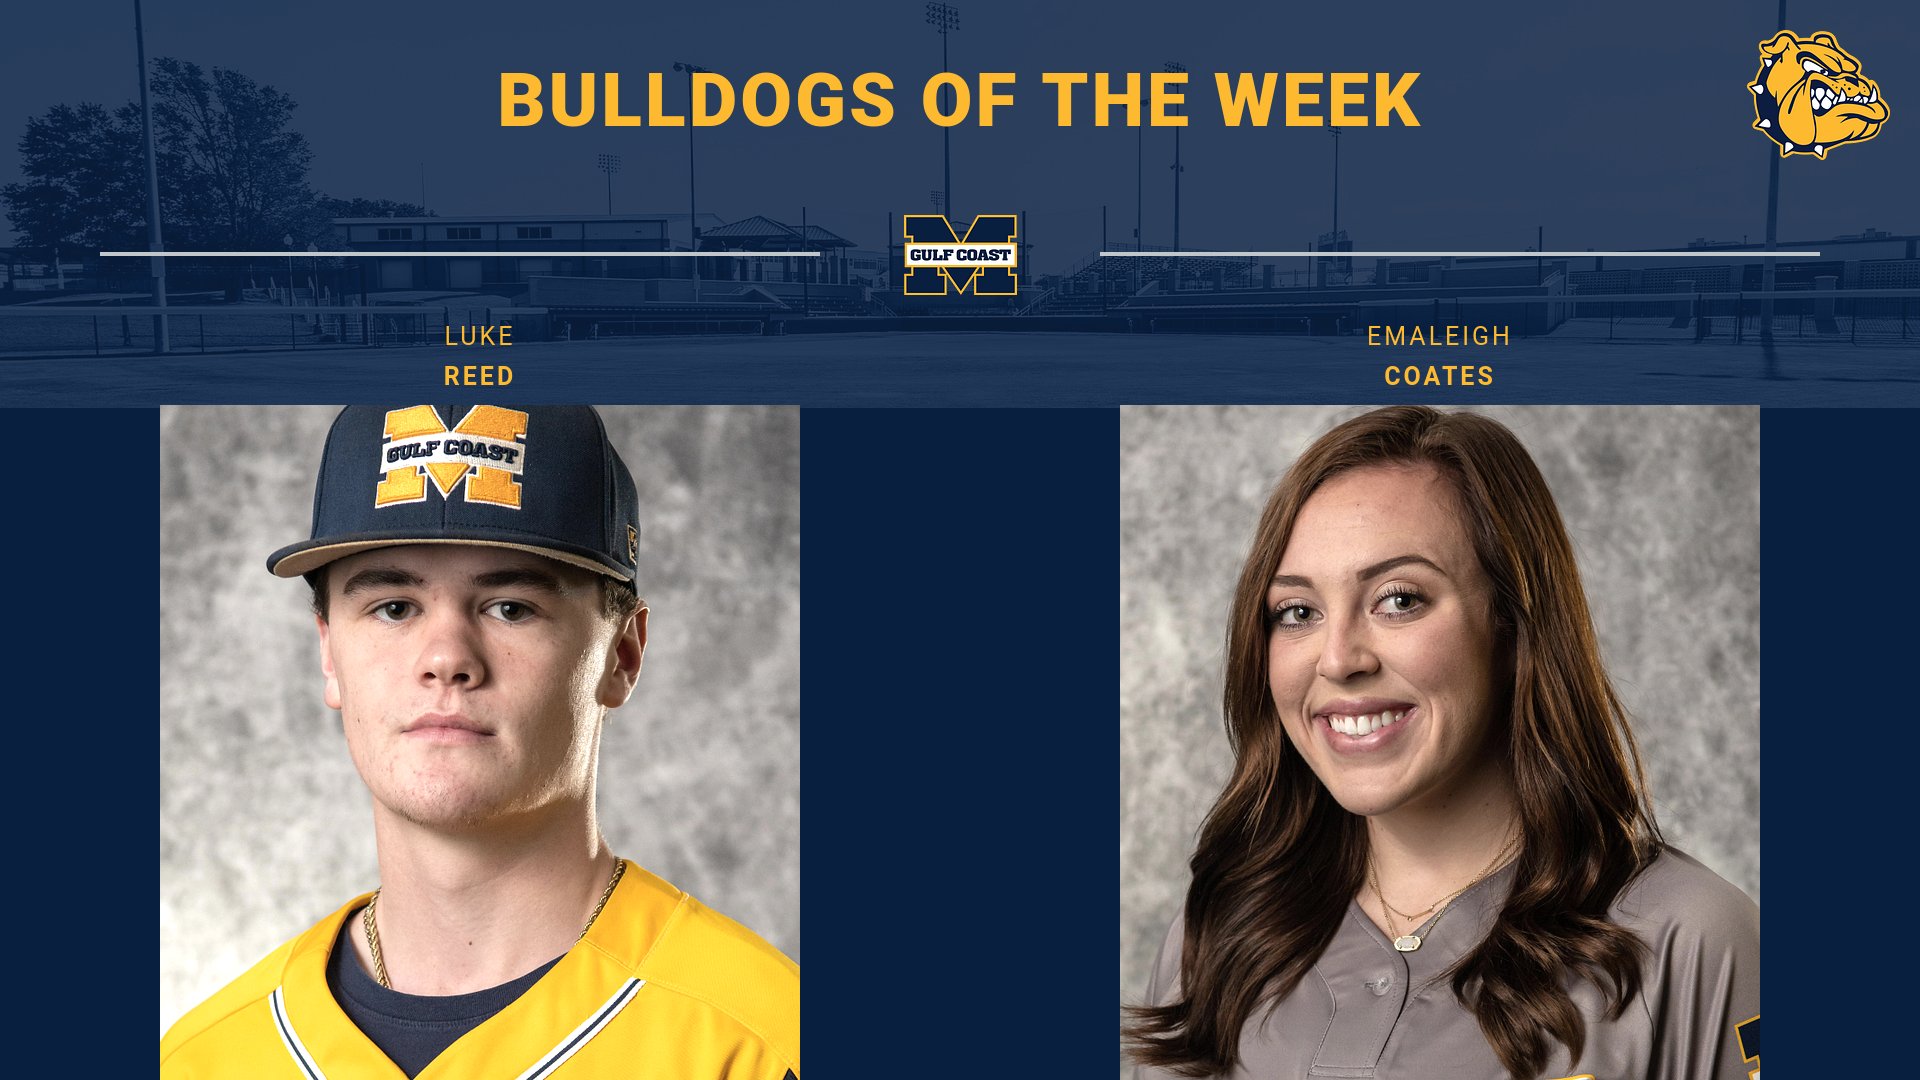 Reed, Coates named Bulldogs of the Week